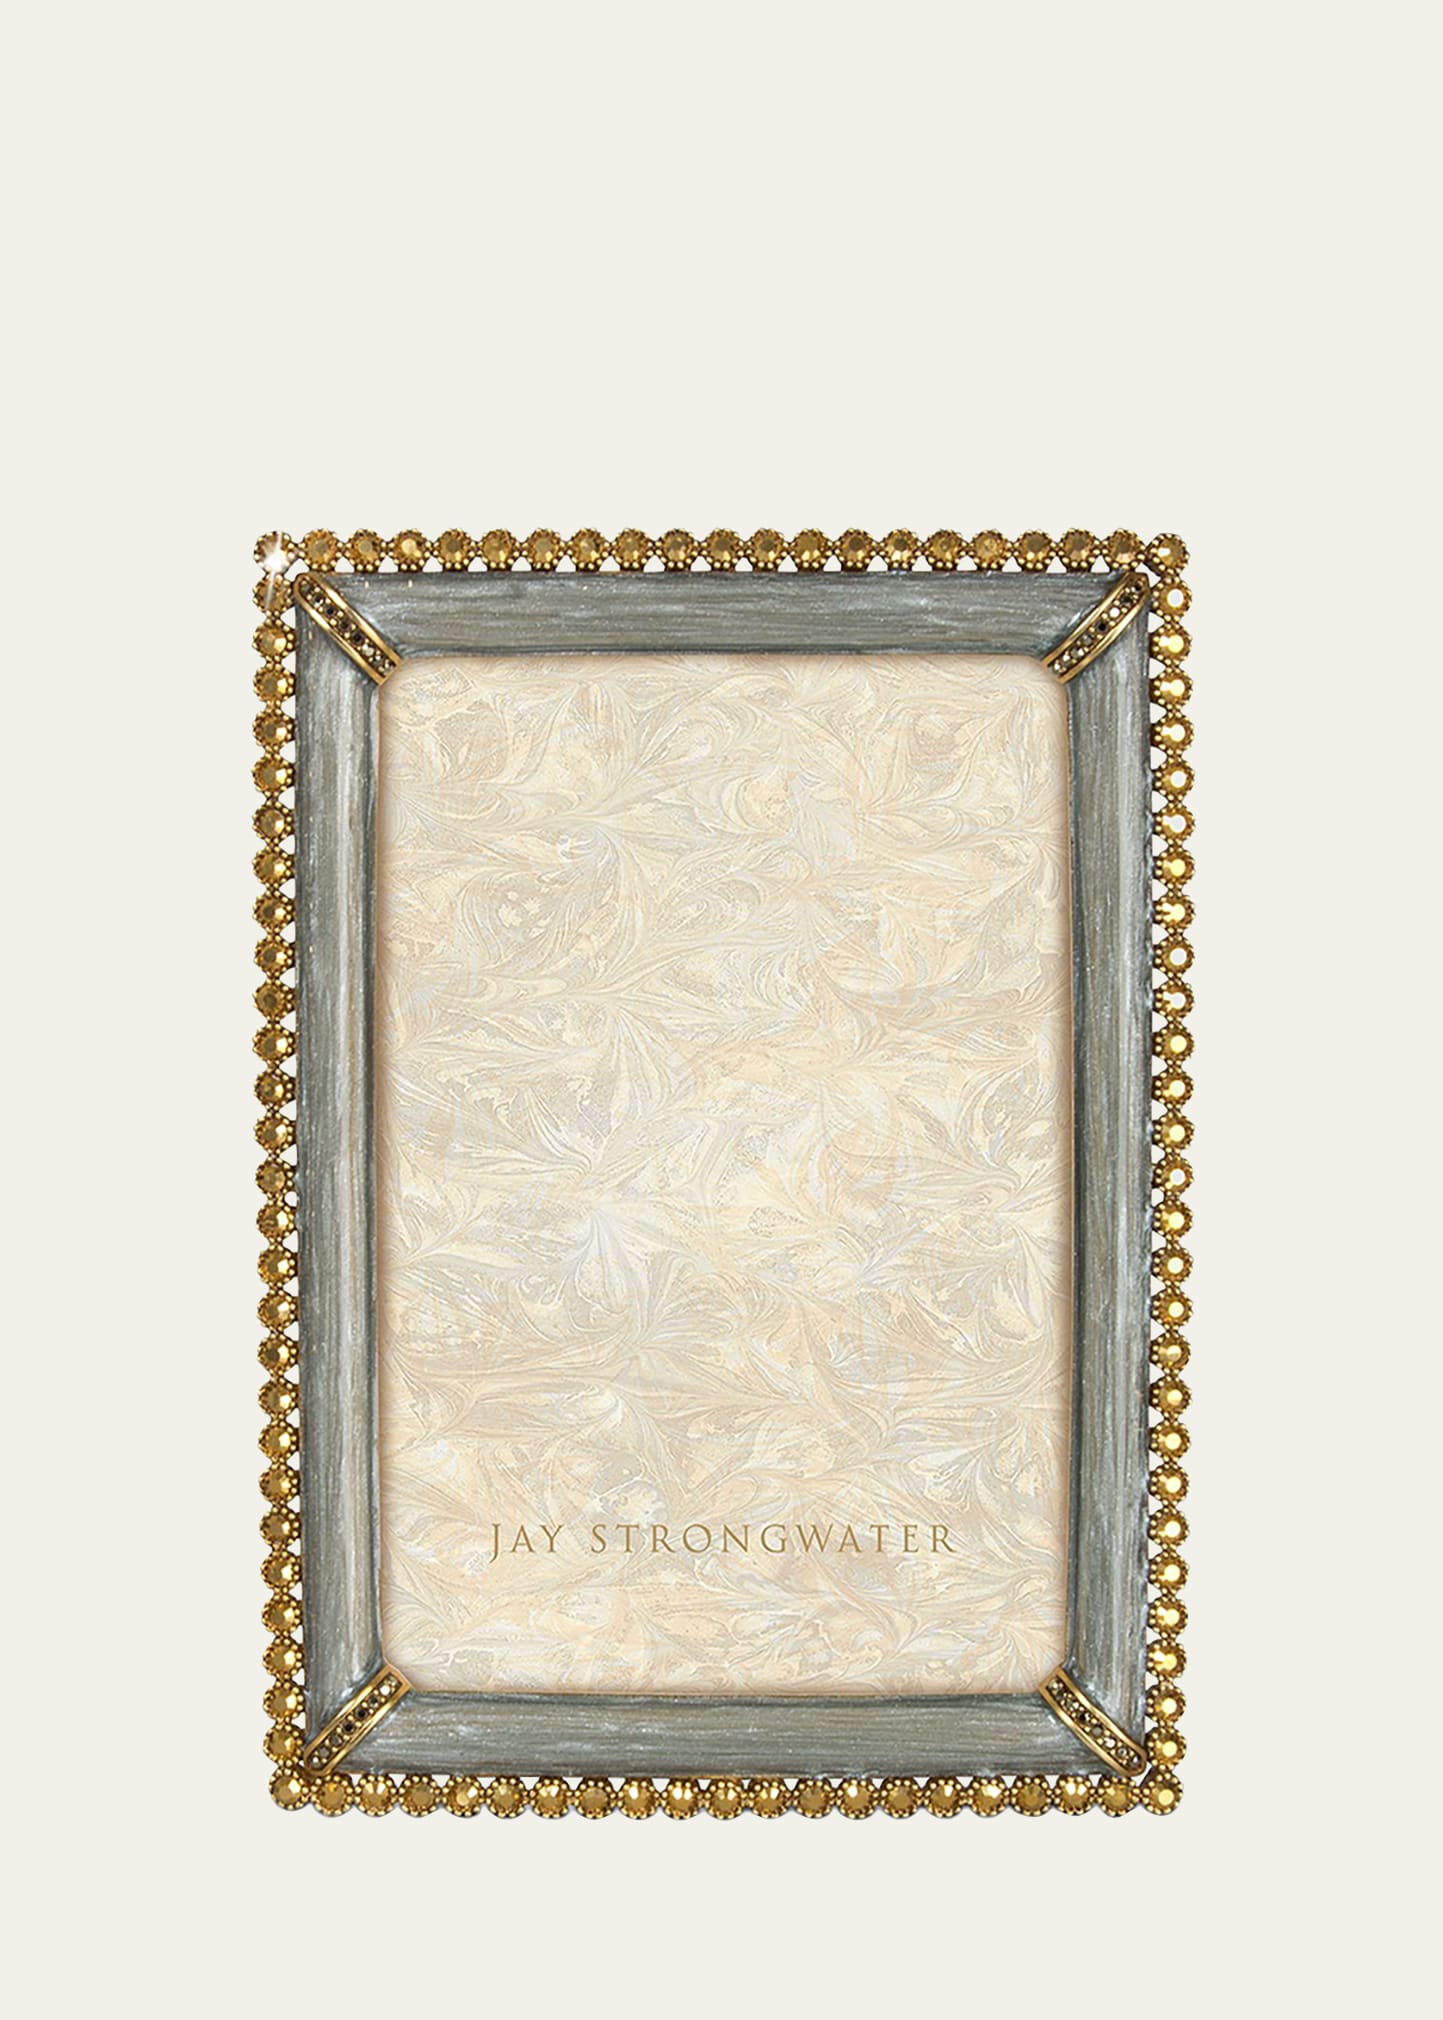 Jay Strongwater Enamel & Stone Edge 4" X 6" Picture Frame